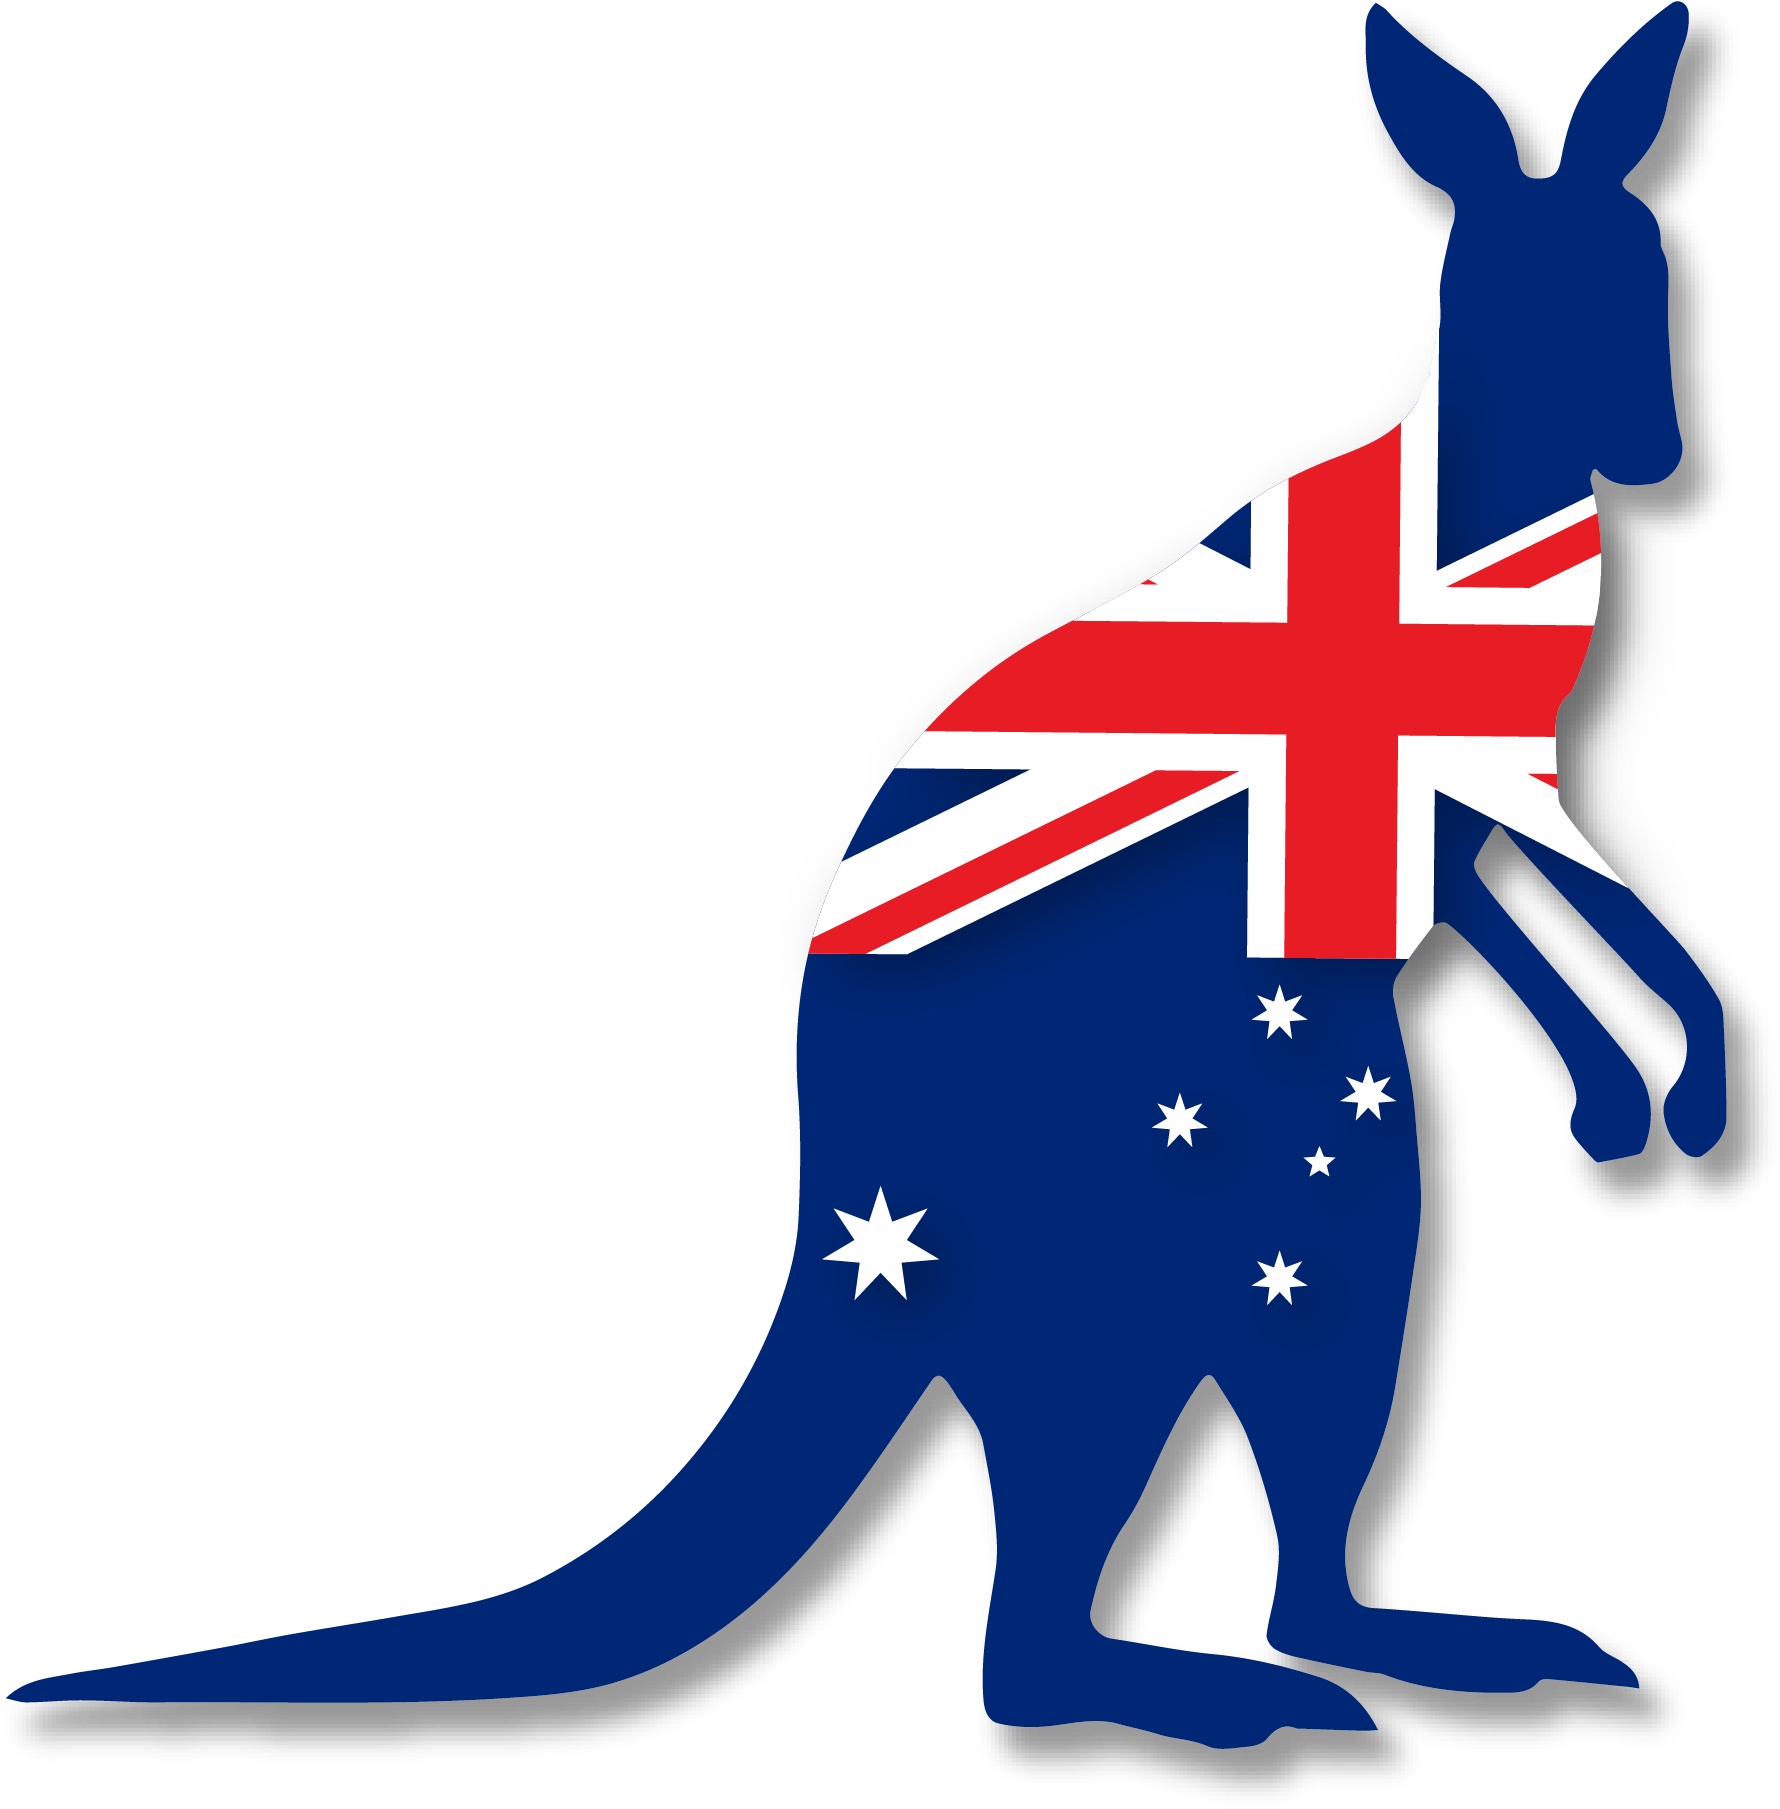 Melbourne Flag PNG HD Quality